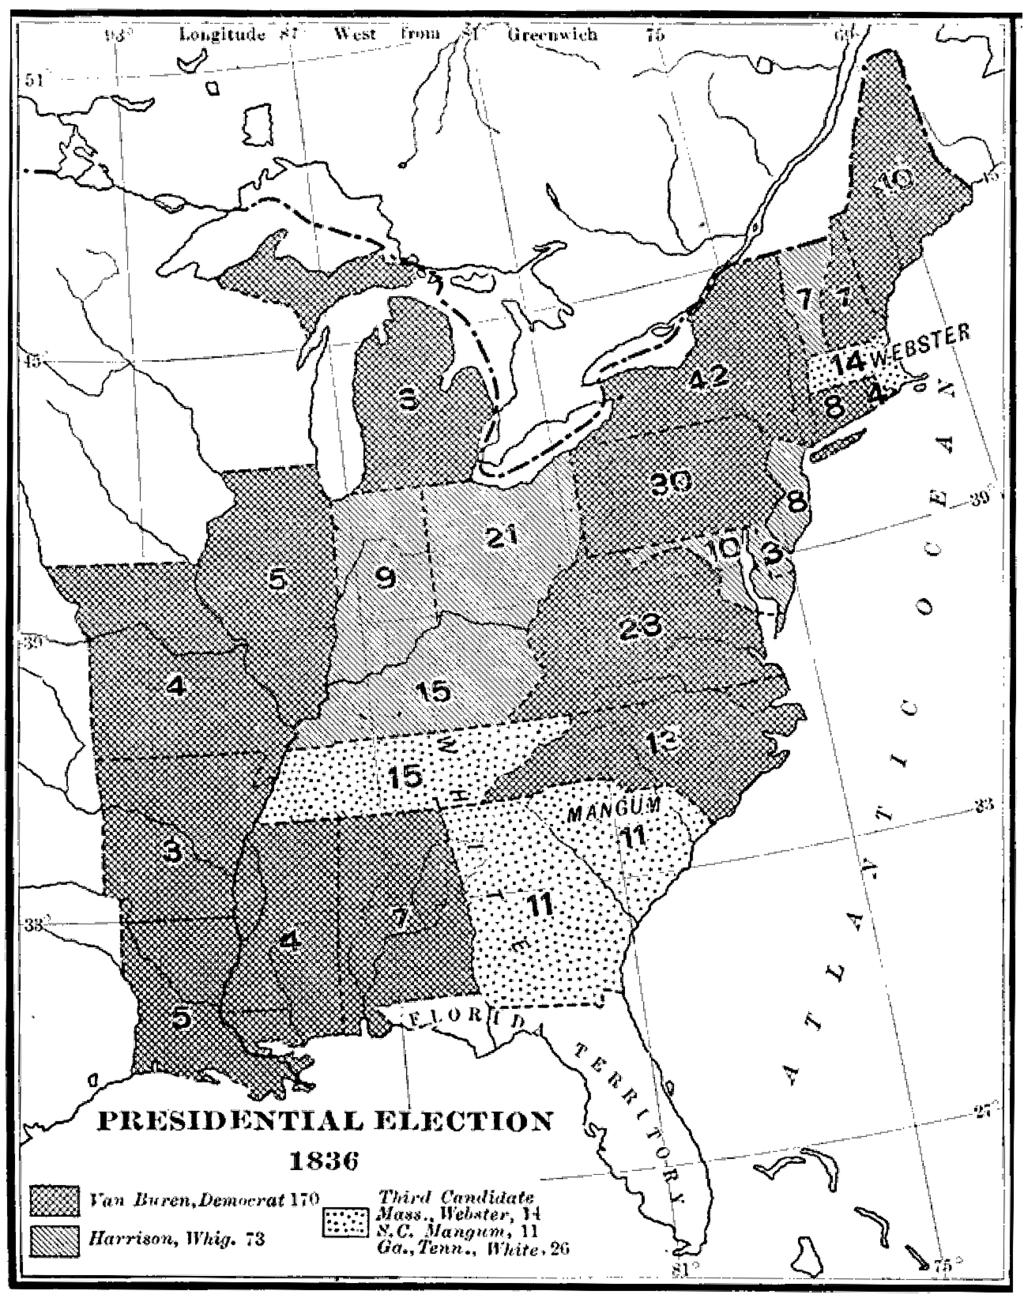 date from the people. Image 11. The Election of 1836 Yet the chaos of the election did not stop there. The Virginia slate of electors, though voting for Van Buren, refused to vote for Johnson as well.